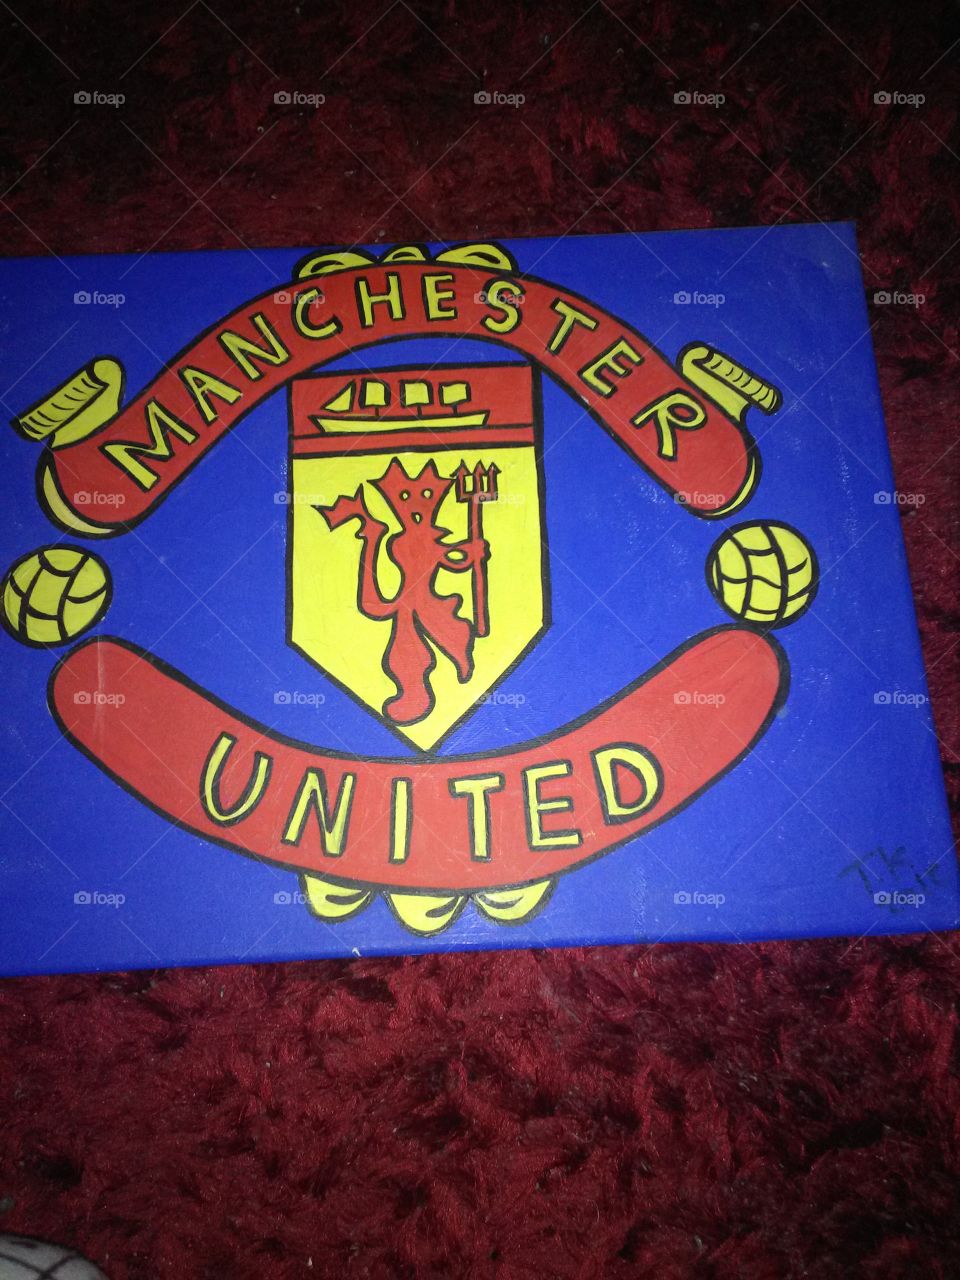 did this for my partner, he's one big Manchester united fan.